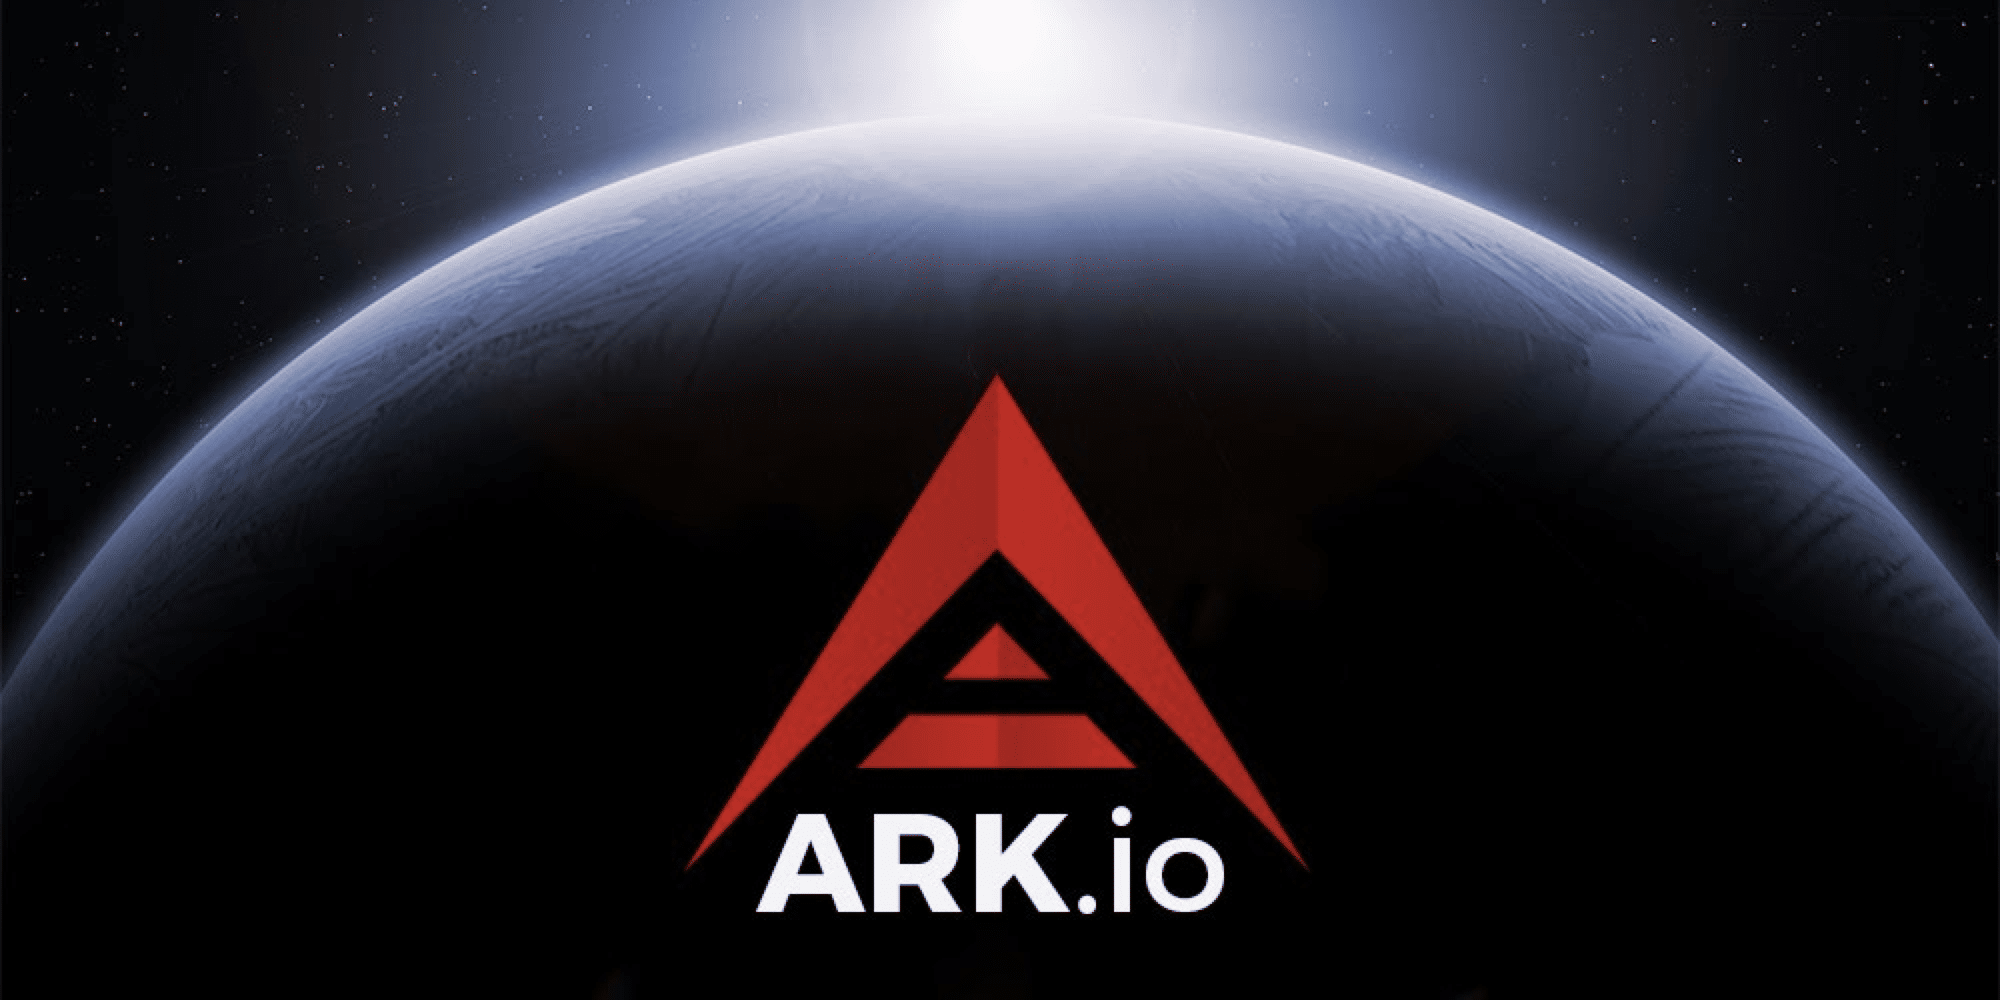 Here’s why the price of ARK cryptocurrency is rising